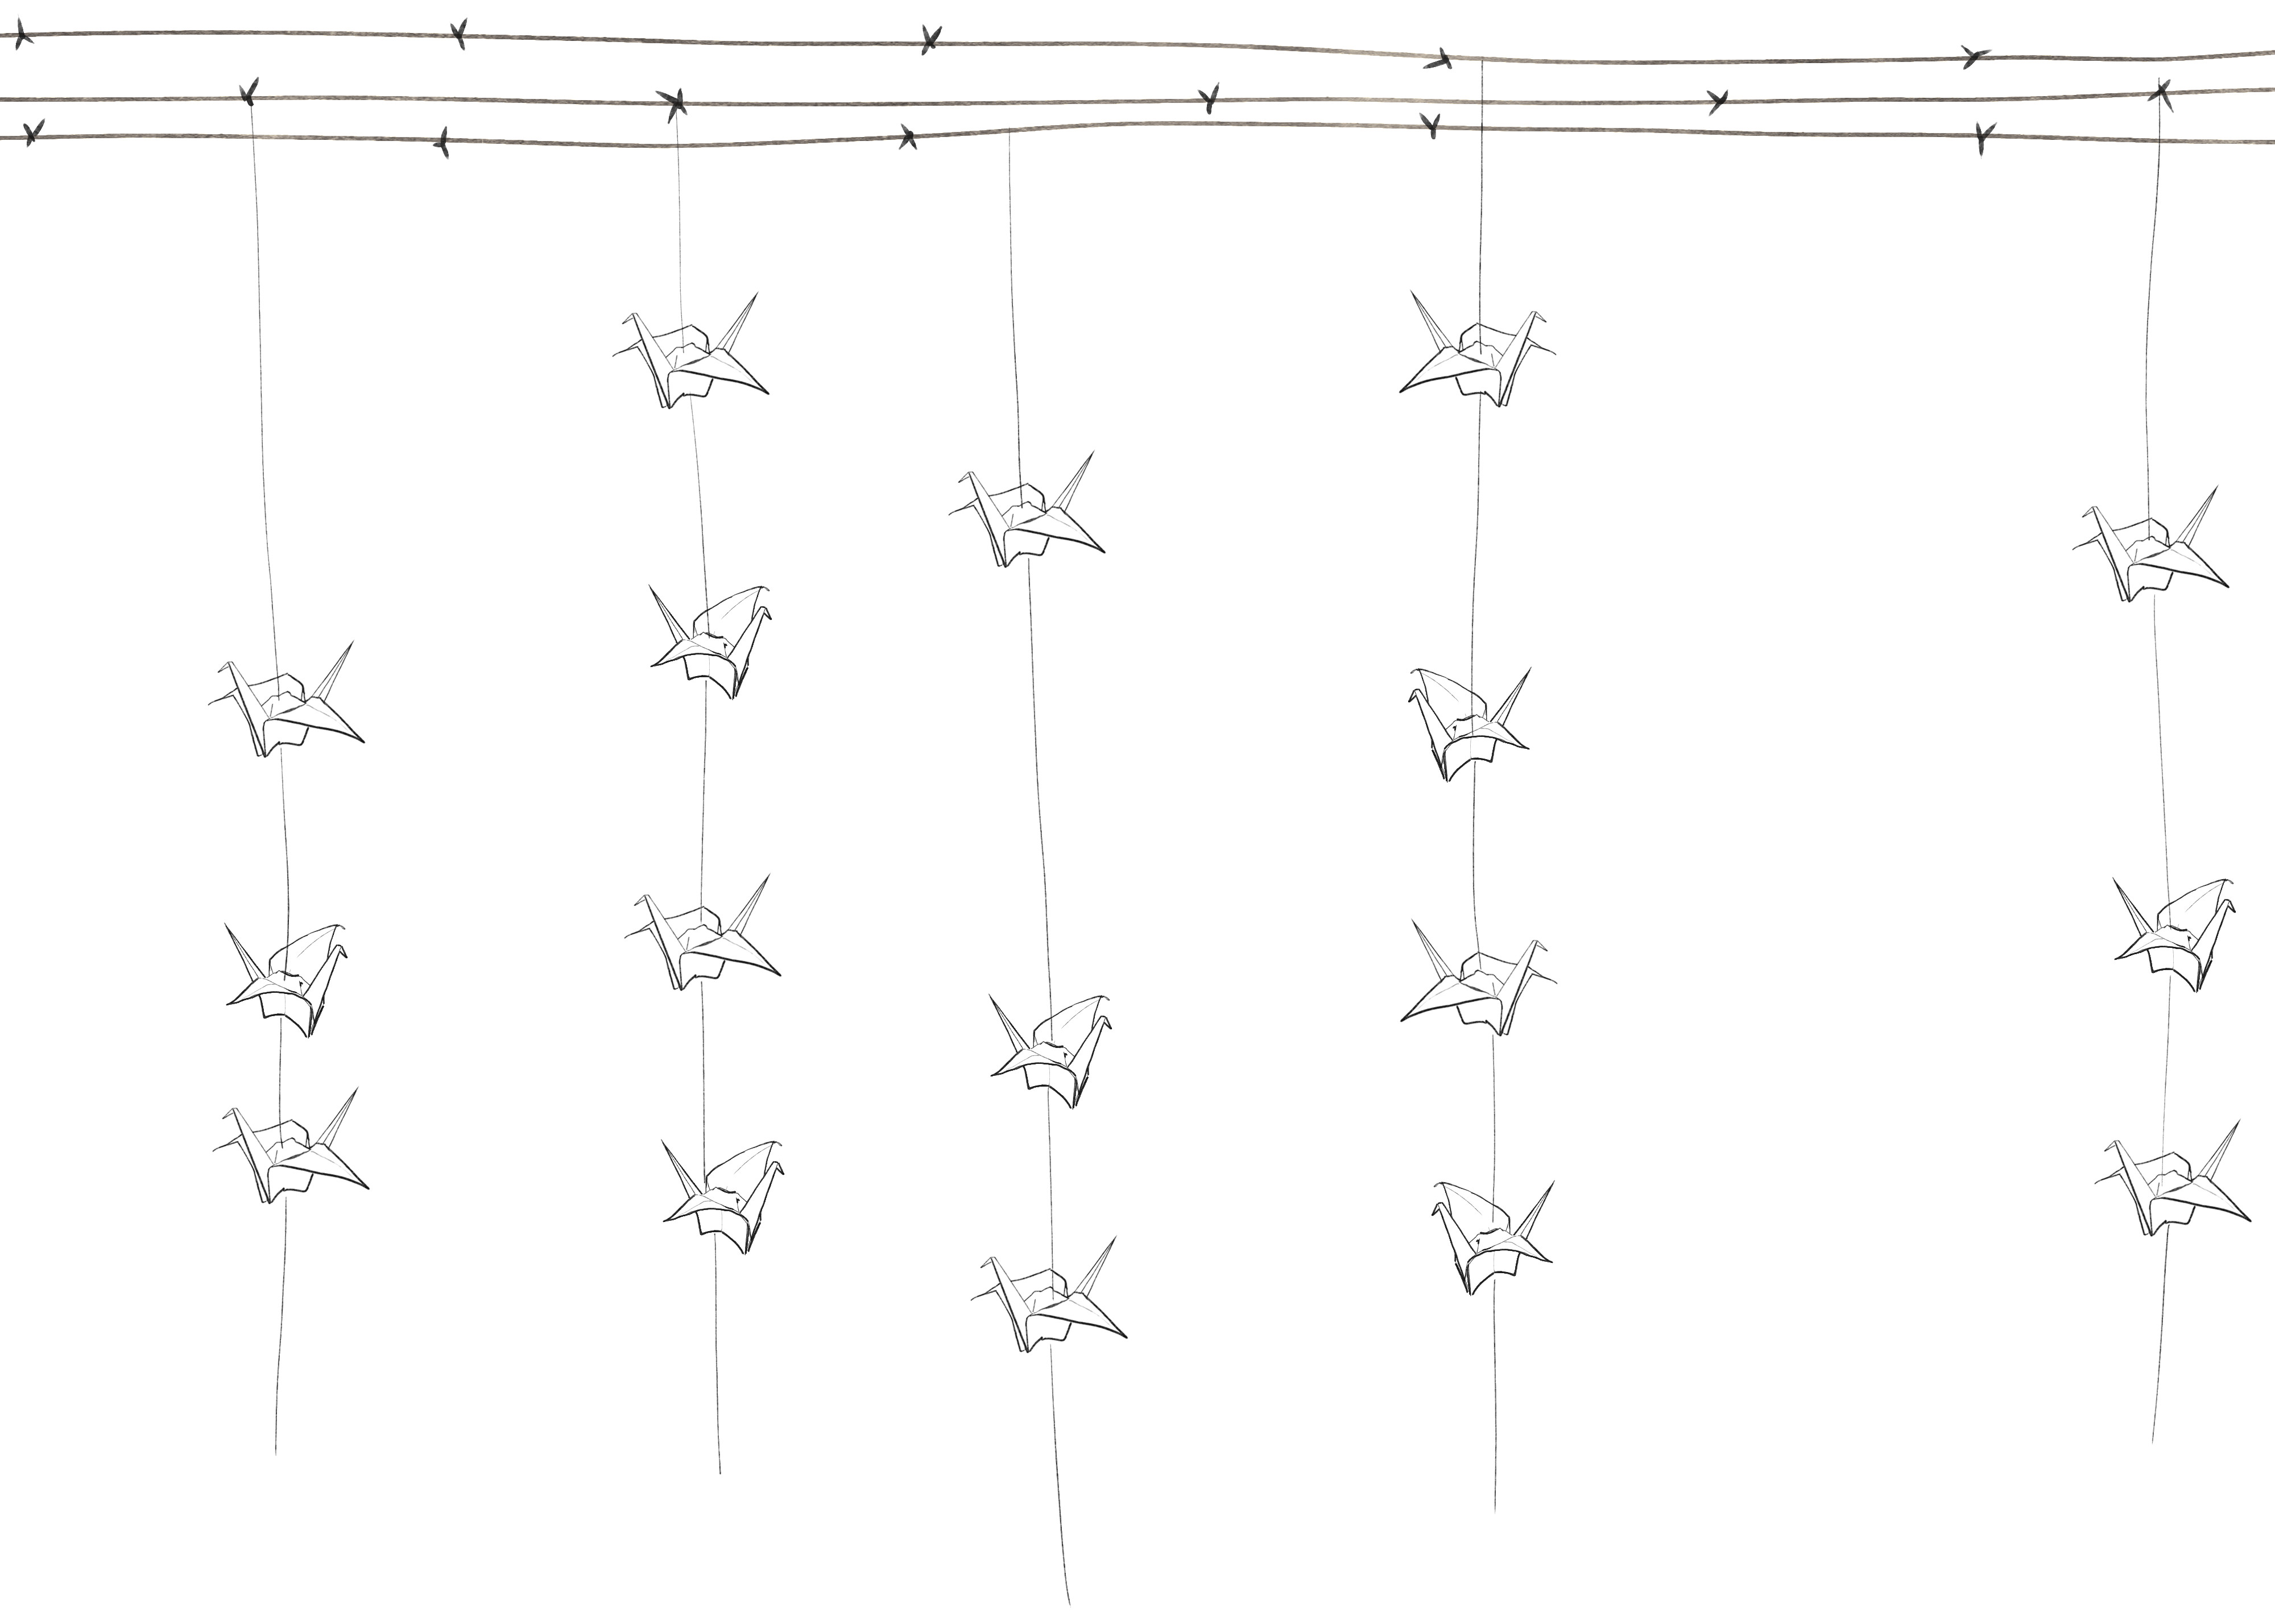 Illustration of paper cranes hanging from three lines of barbed wire